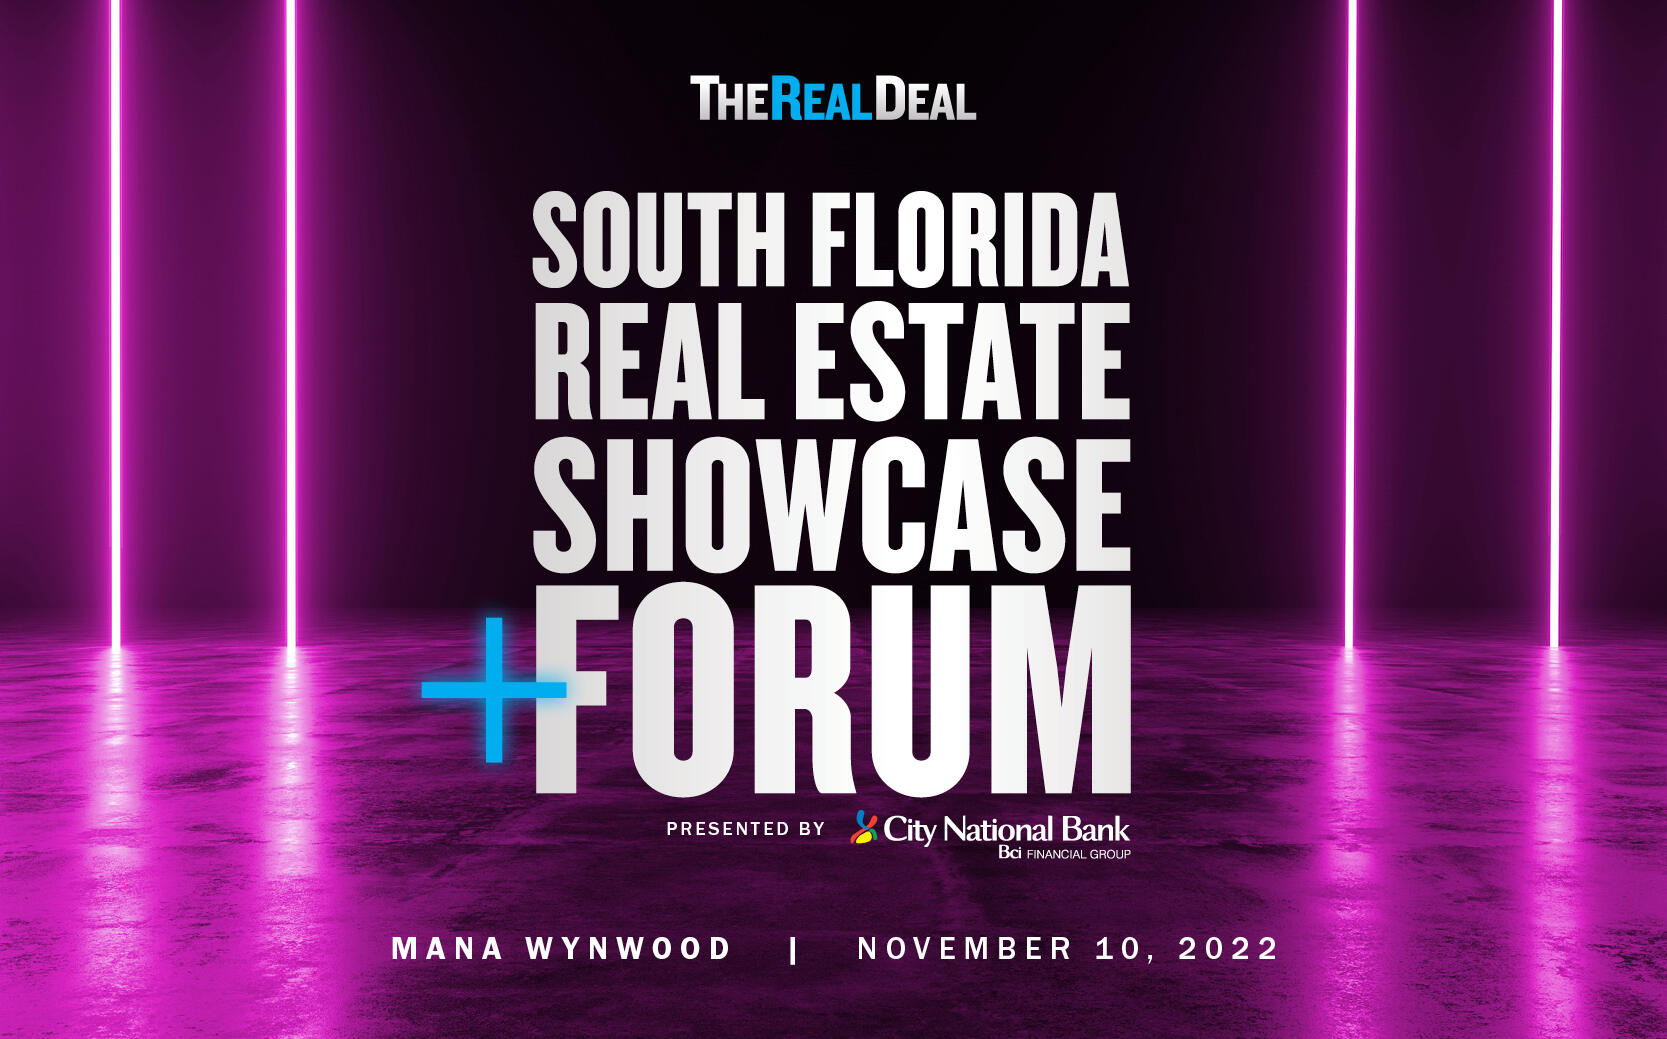 Registration is now open for TRD’s South Florida Showcase + Forum